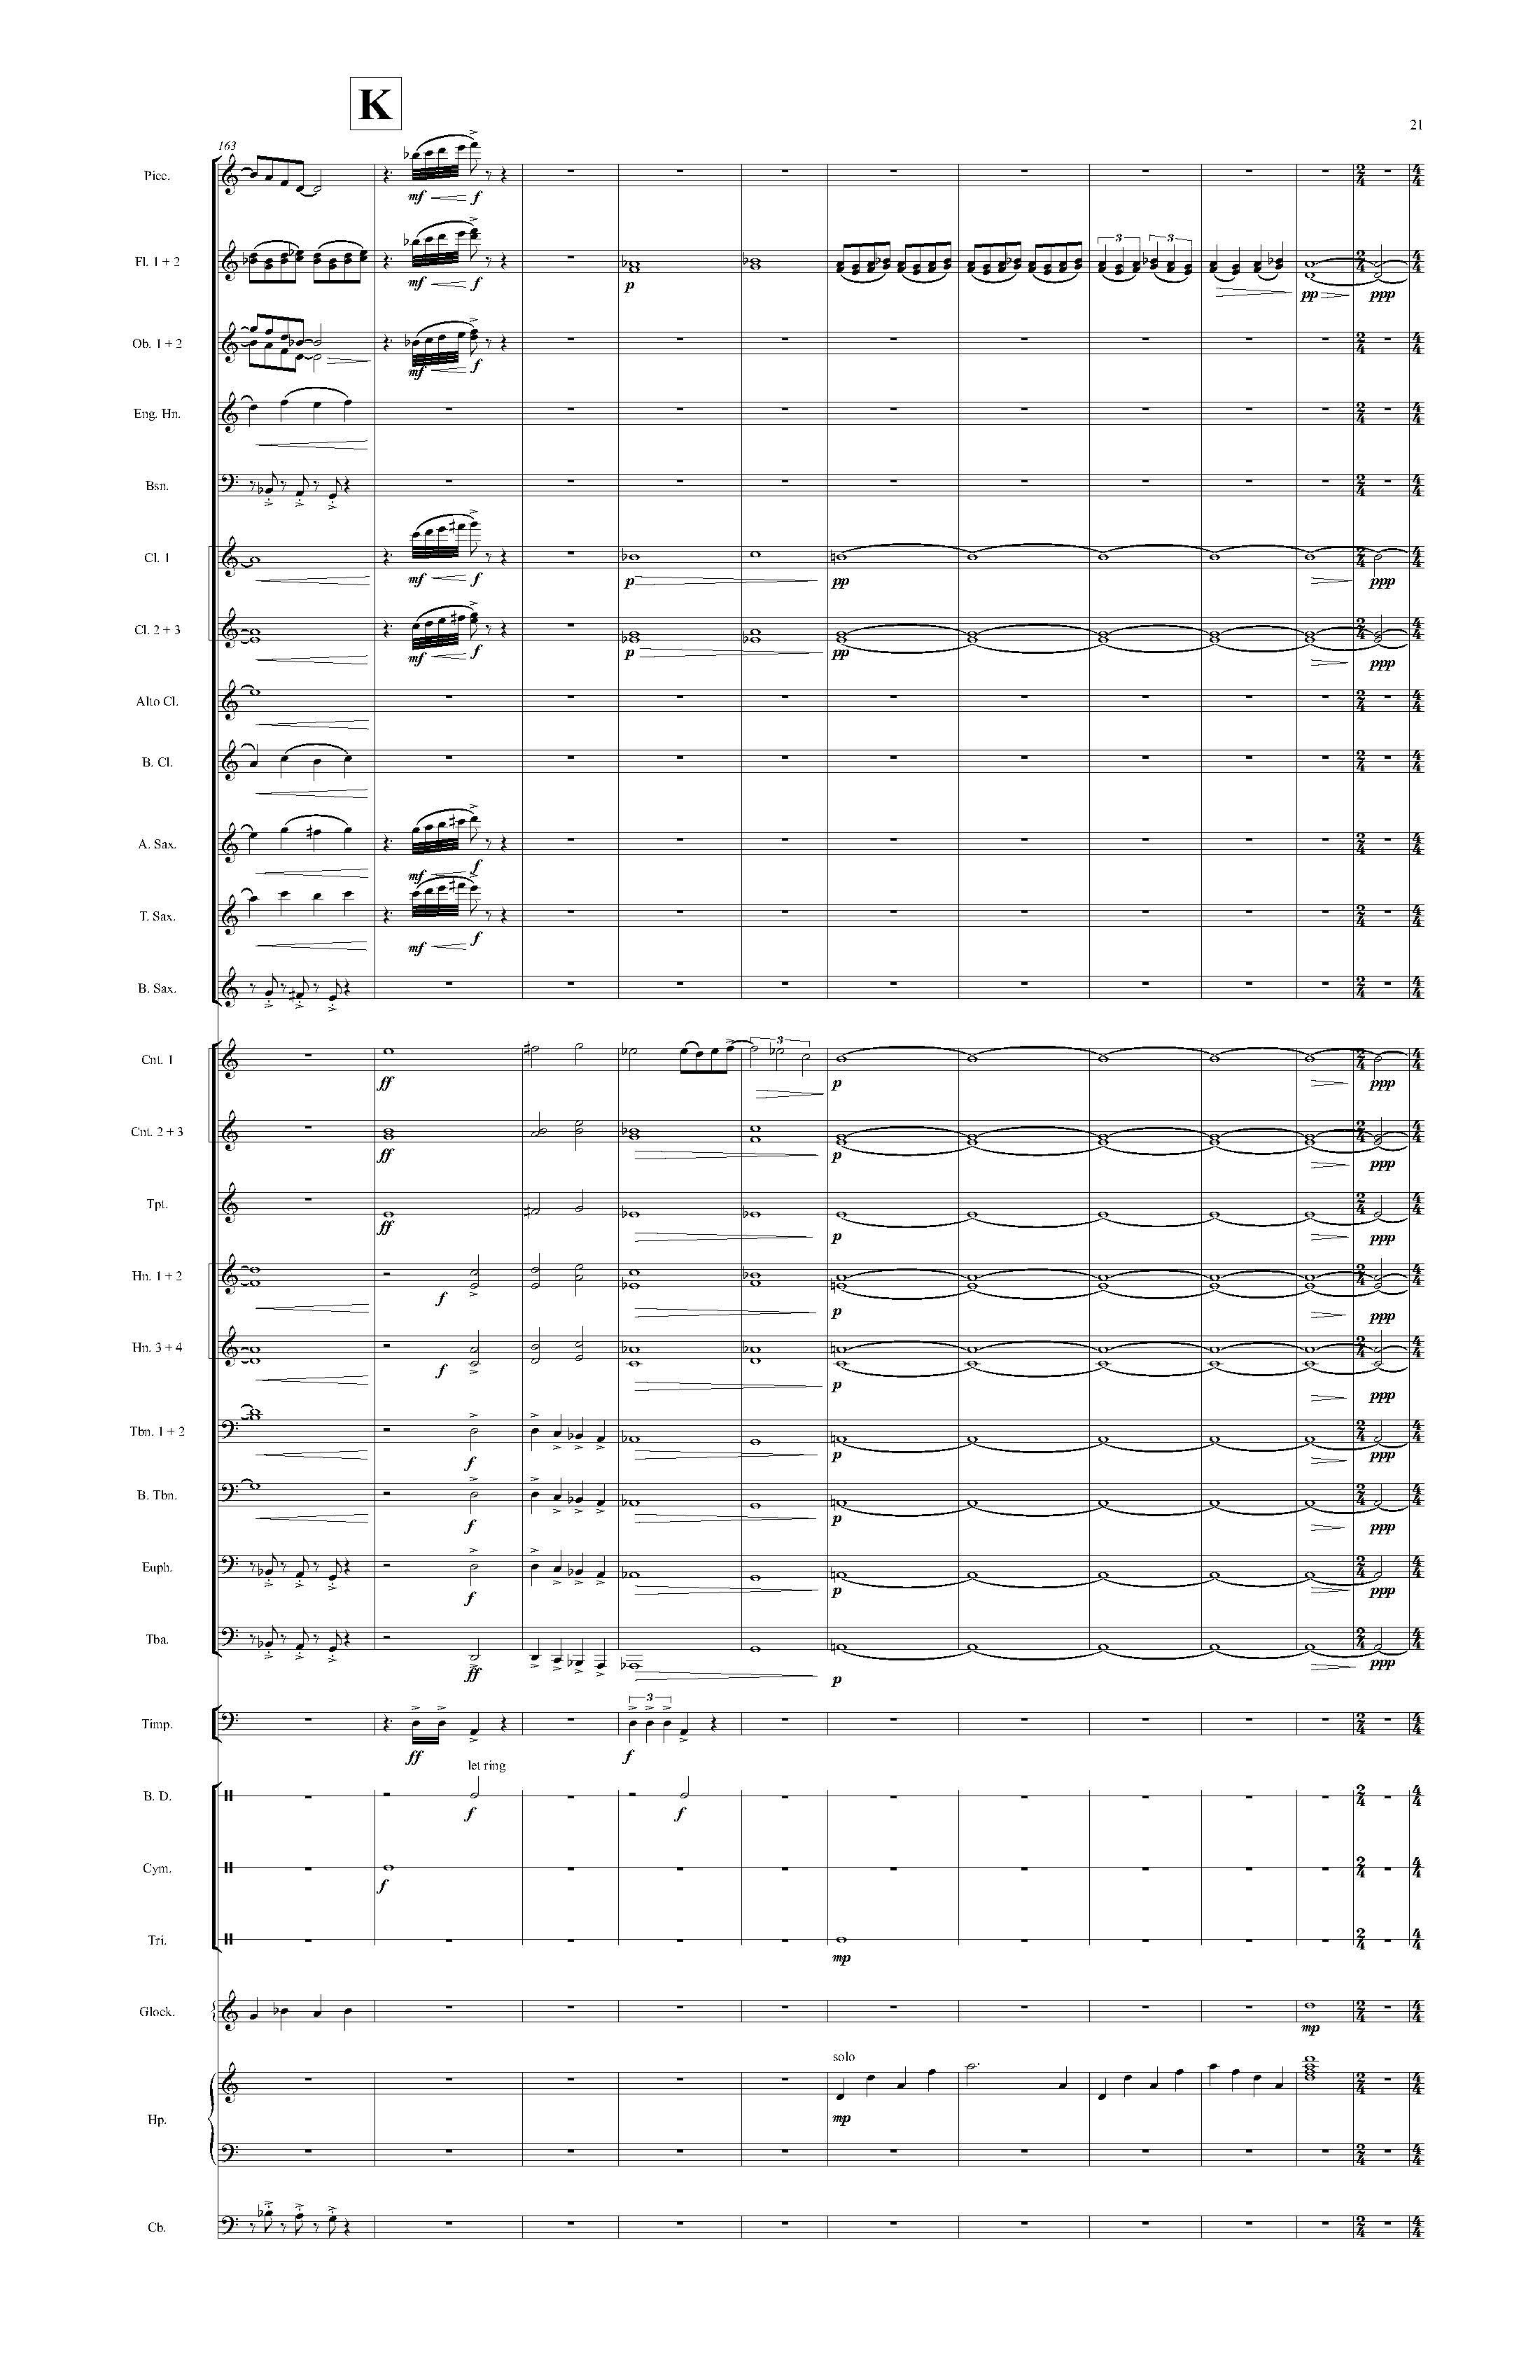 Psyche - Complete Score_Page_27.jpg